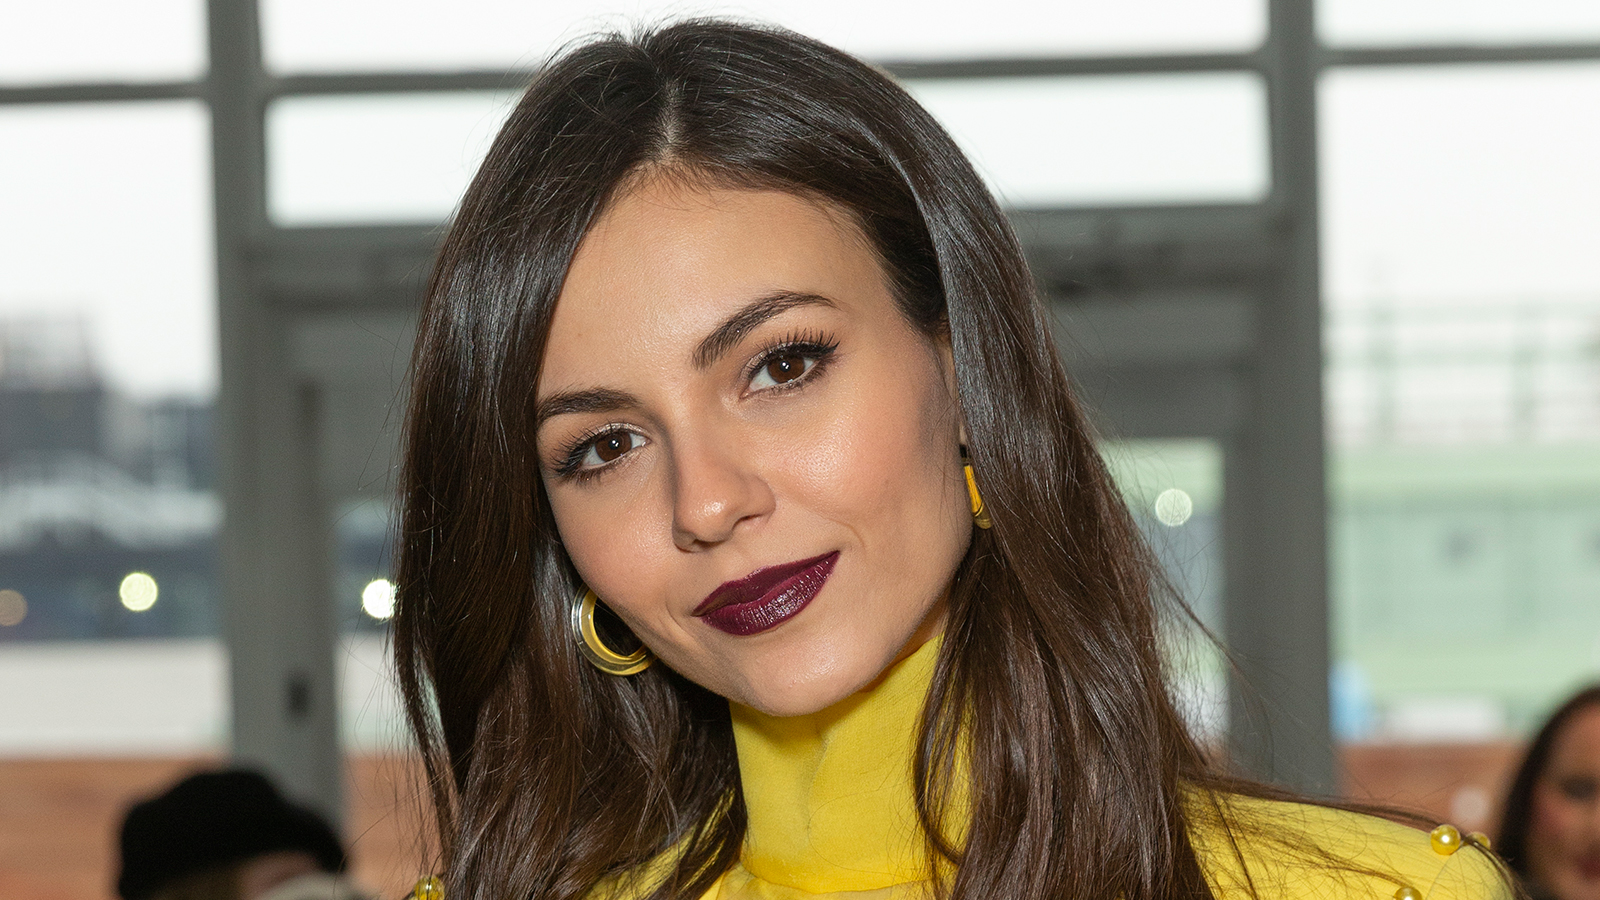 Victoria Justice Best Red Carpet Looks Over the Years: Photos